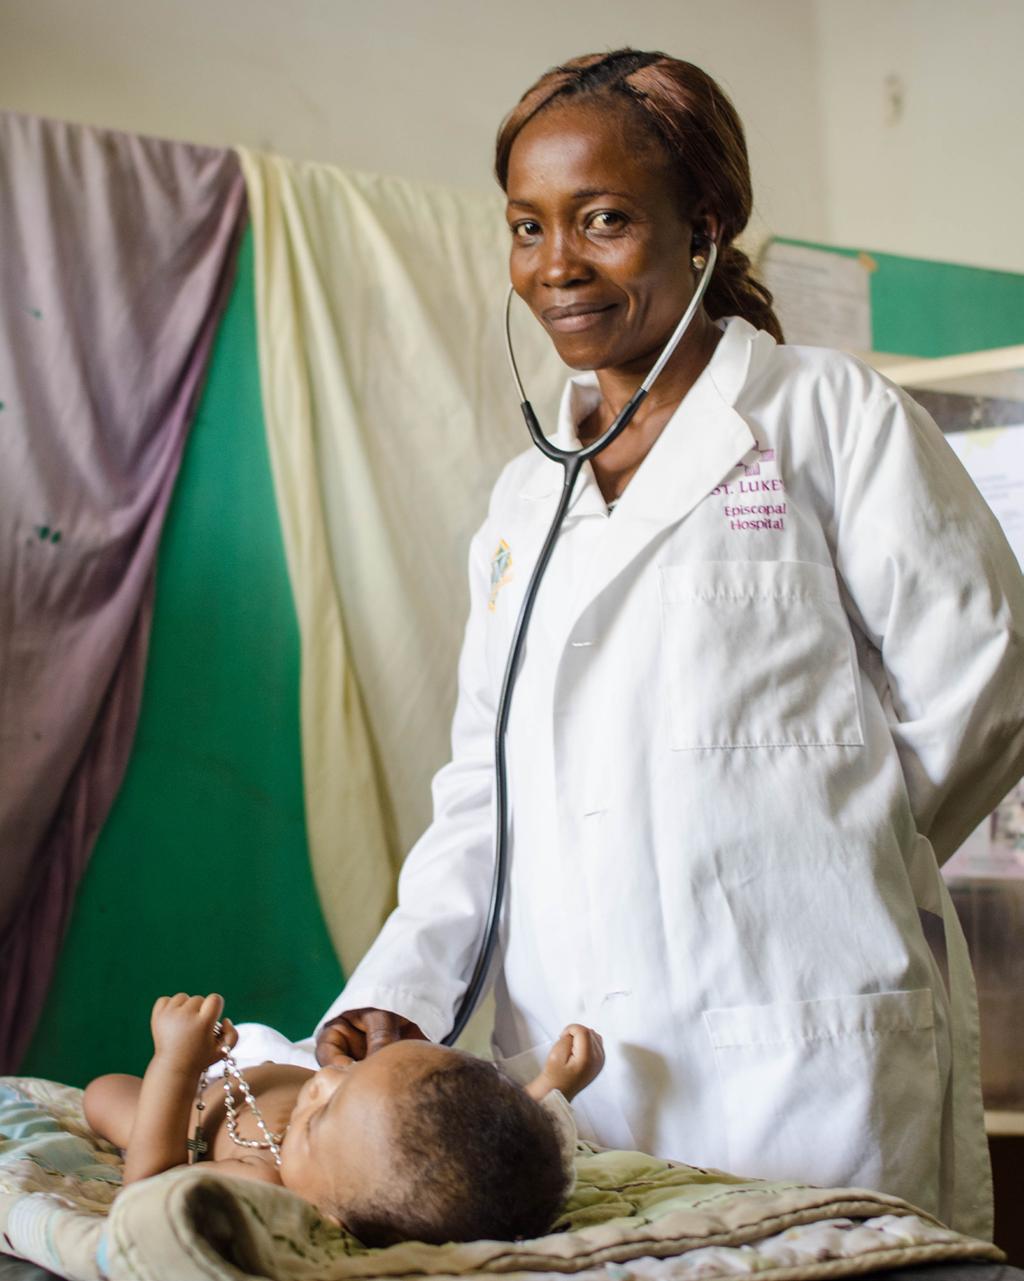 Equateur, DRC 2018 Mirielle Miguanga, a paediatrician from the Centre Hospitalier Universitaire de Mbandaka treats her sixmonth old patient, Narcis, with his mother Raphine by his side.